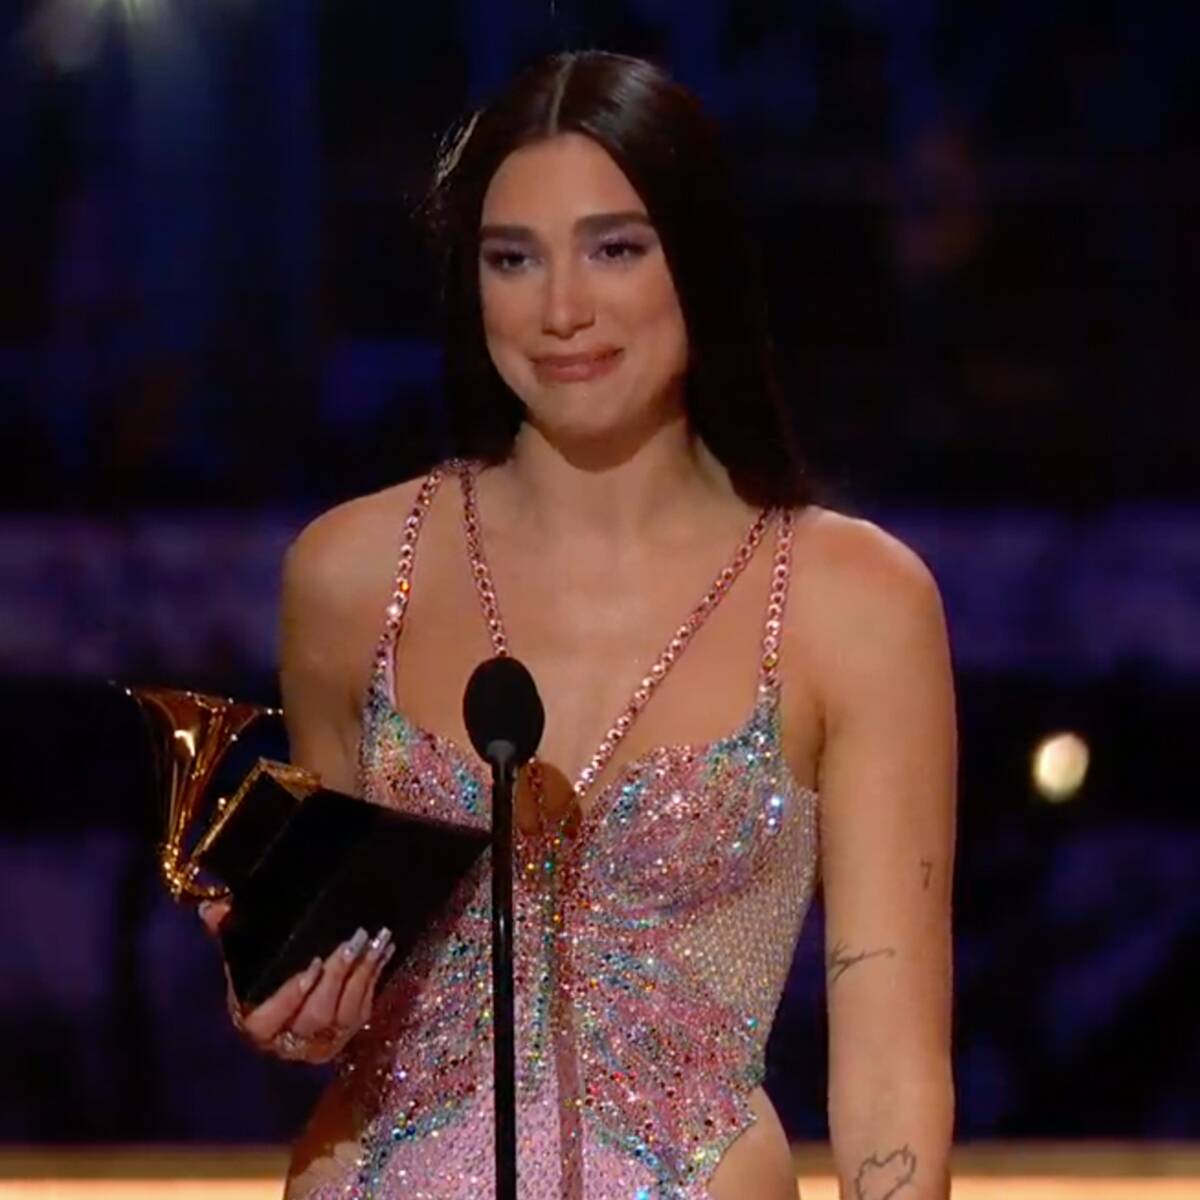 Dua Lipa Explains Why She Isn't "Jaded" Anymore After Her 2021 Grammys Win